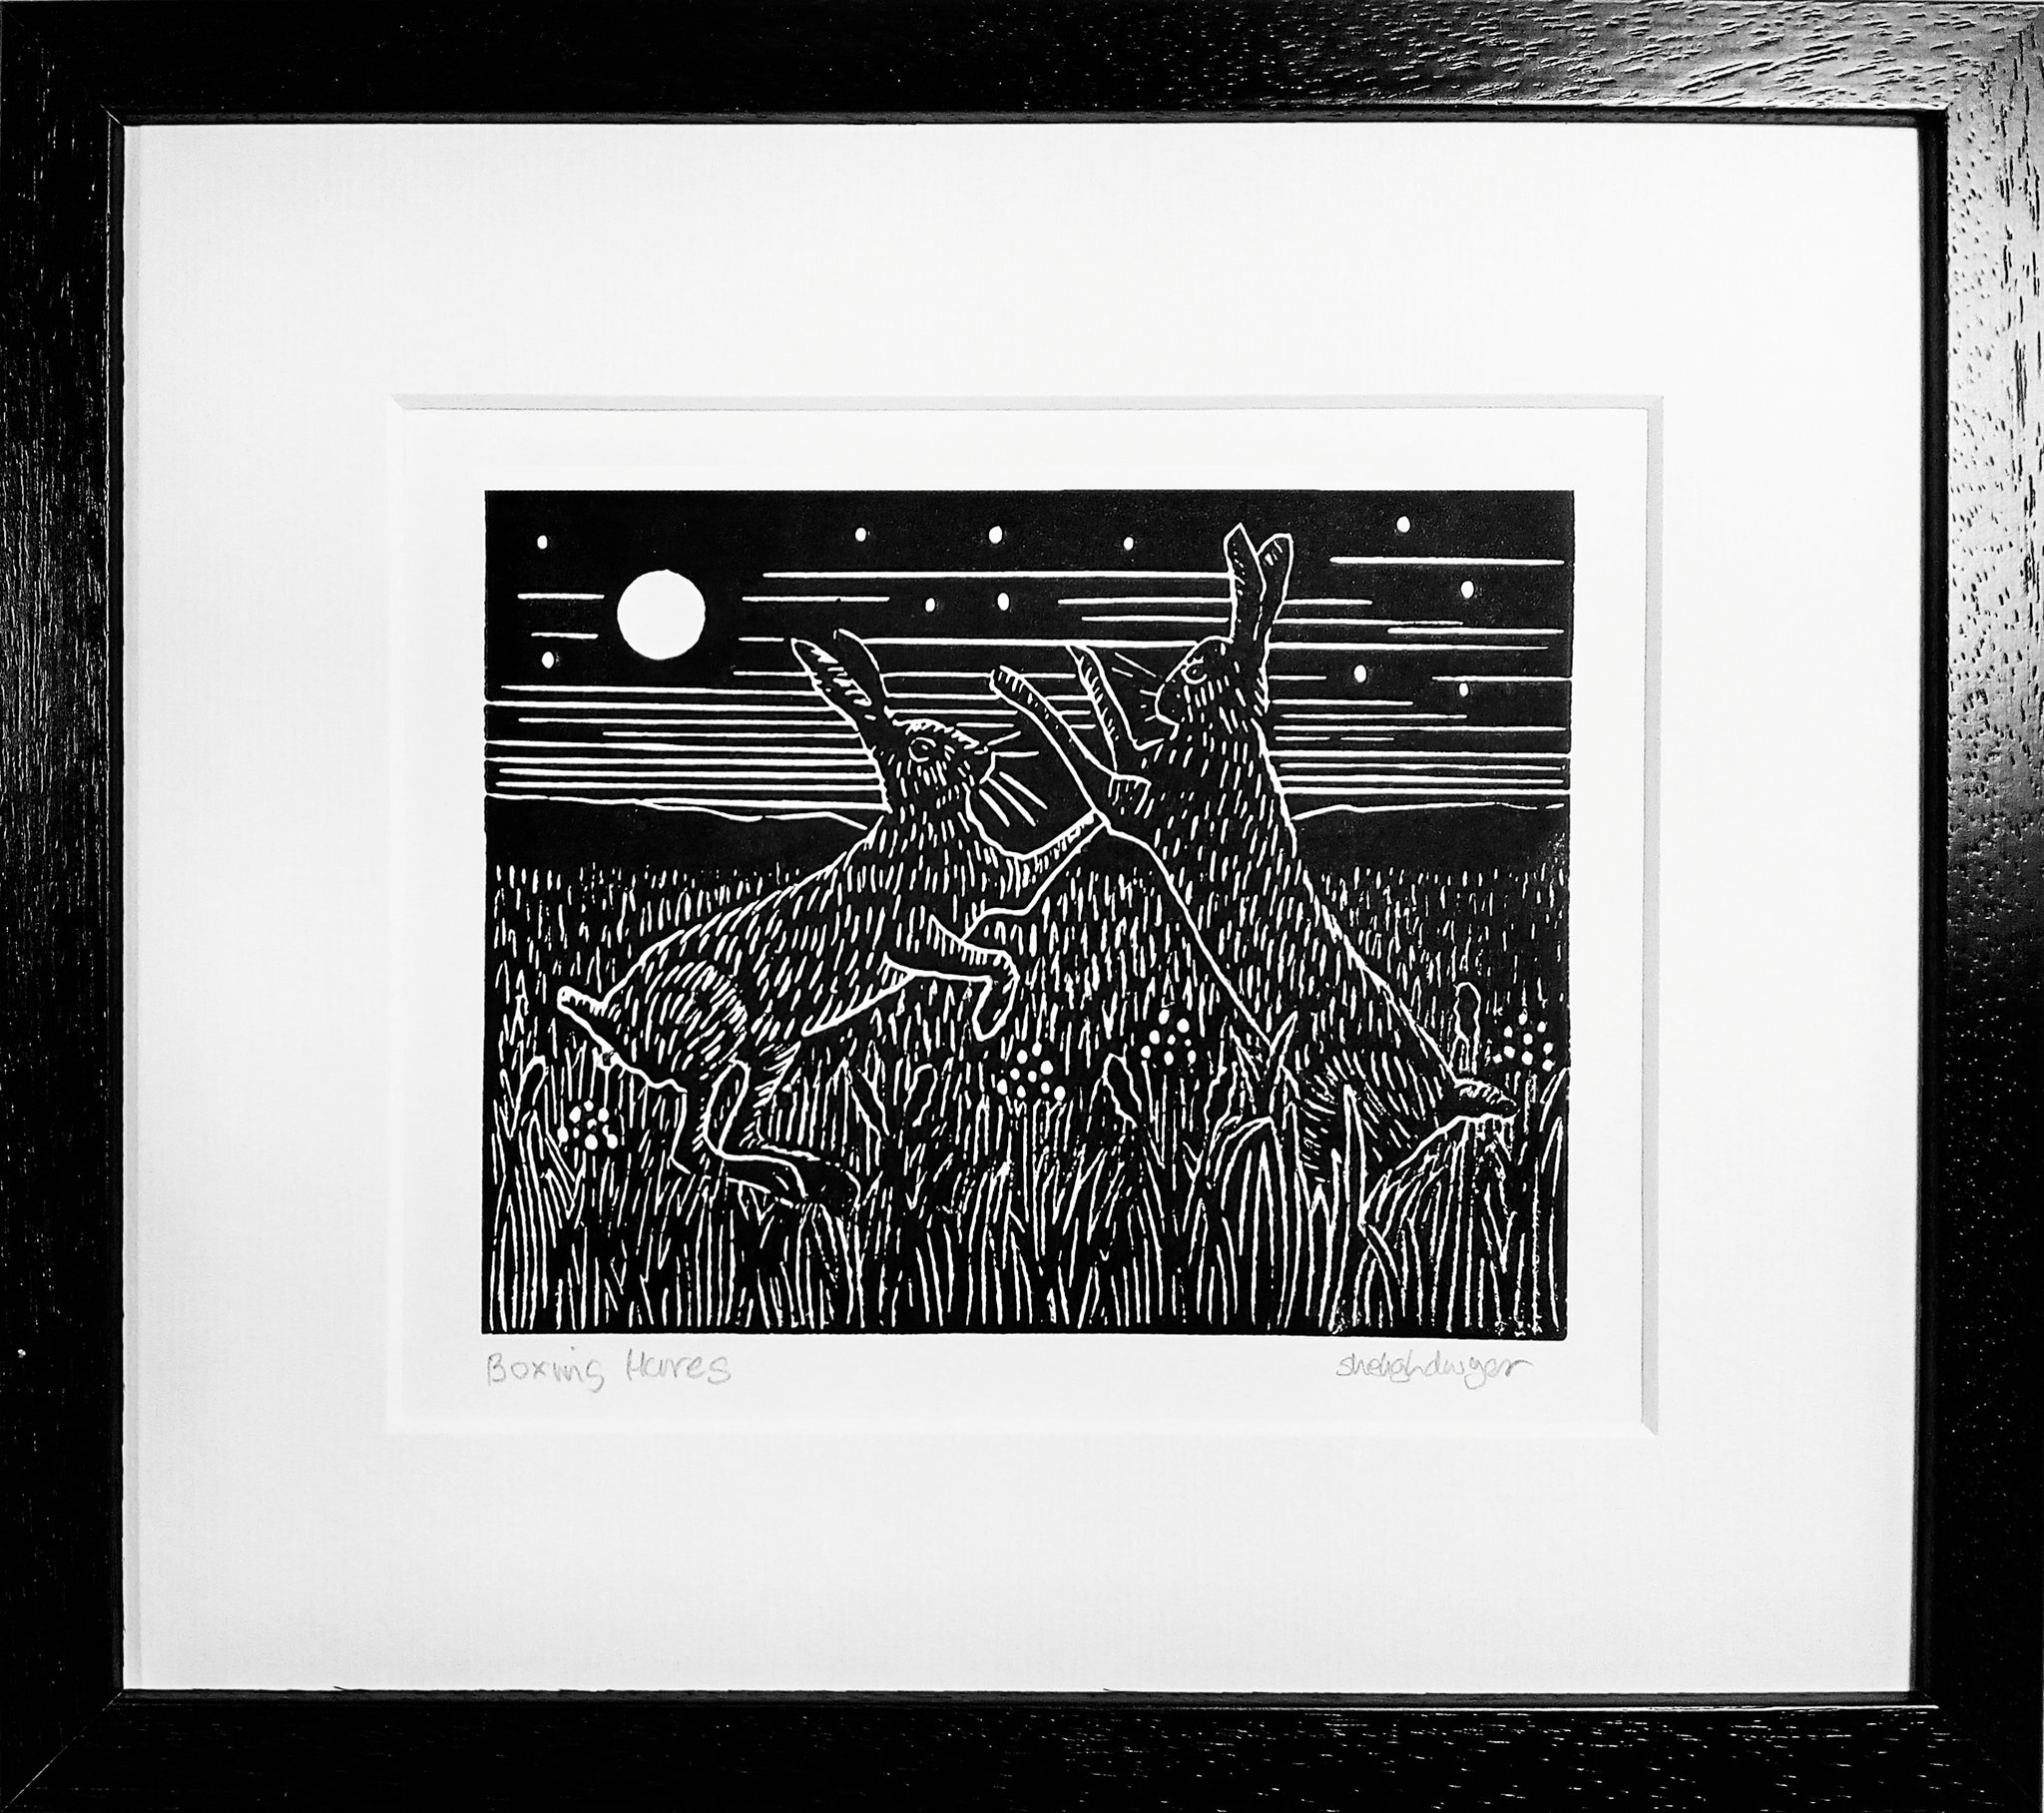 Framed Hand Printed Black and White Lino Print of Boxing Hares 